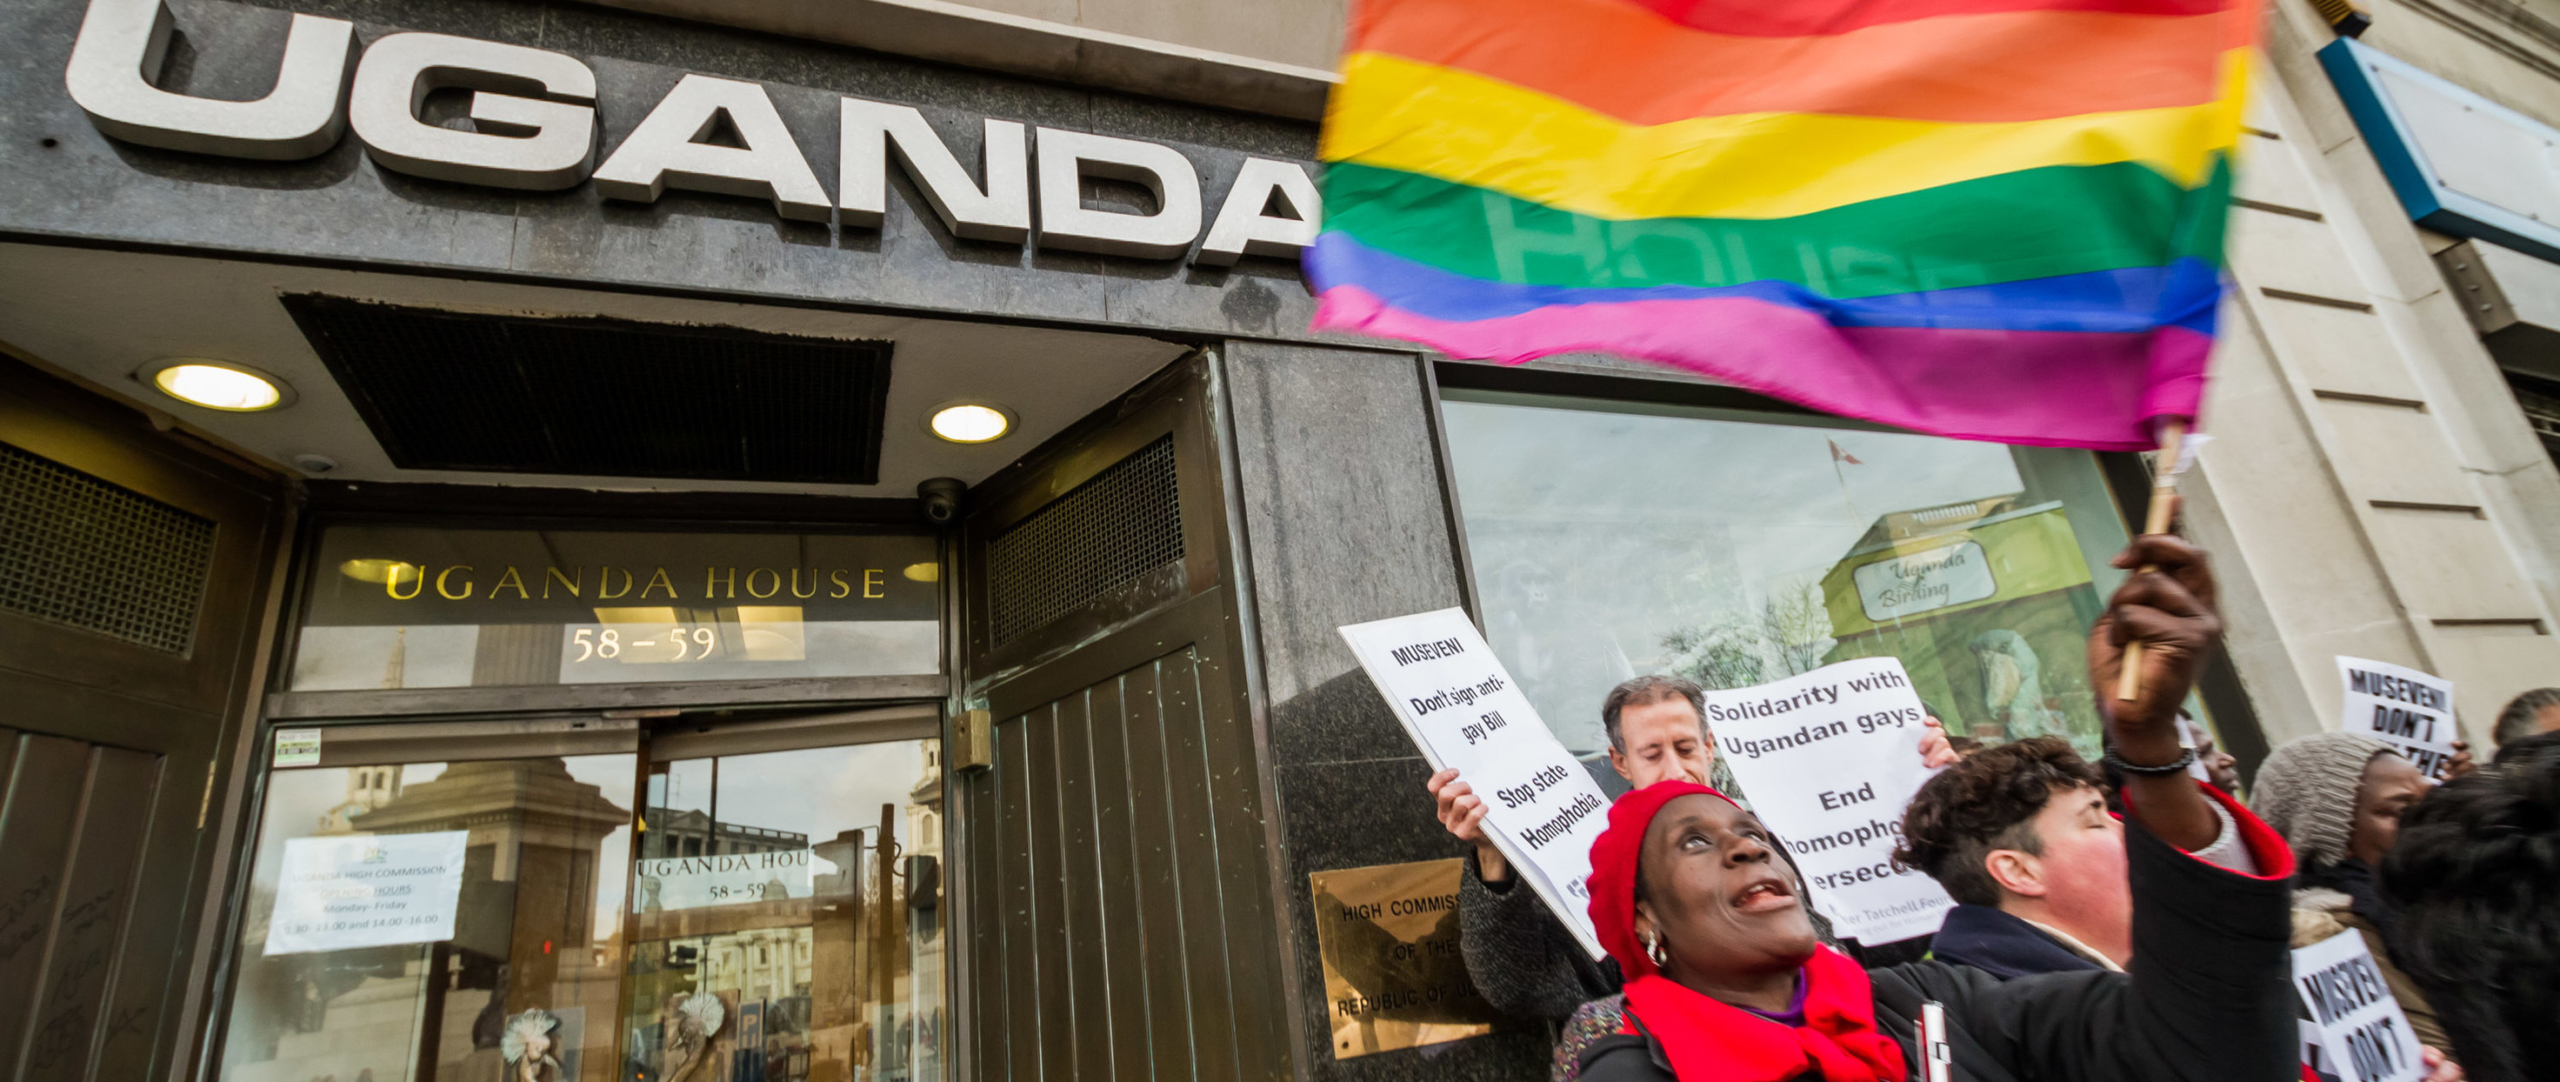 LGBTI Persons in Africa face discrimination due to their identity